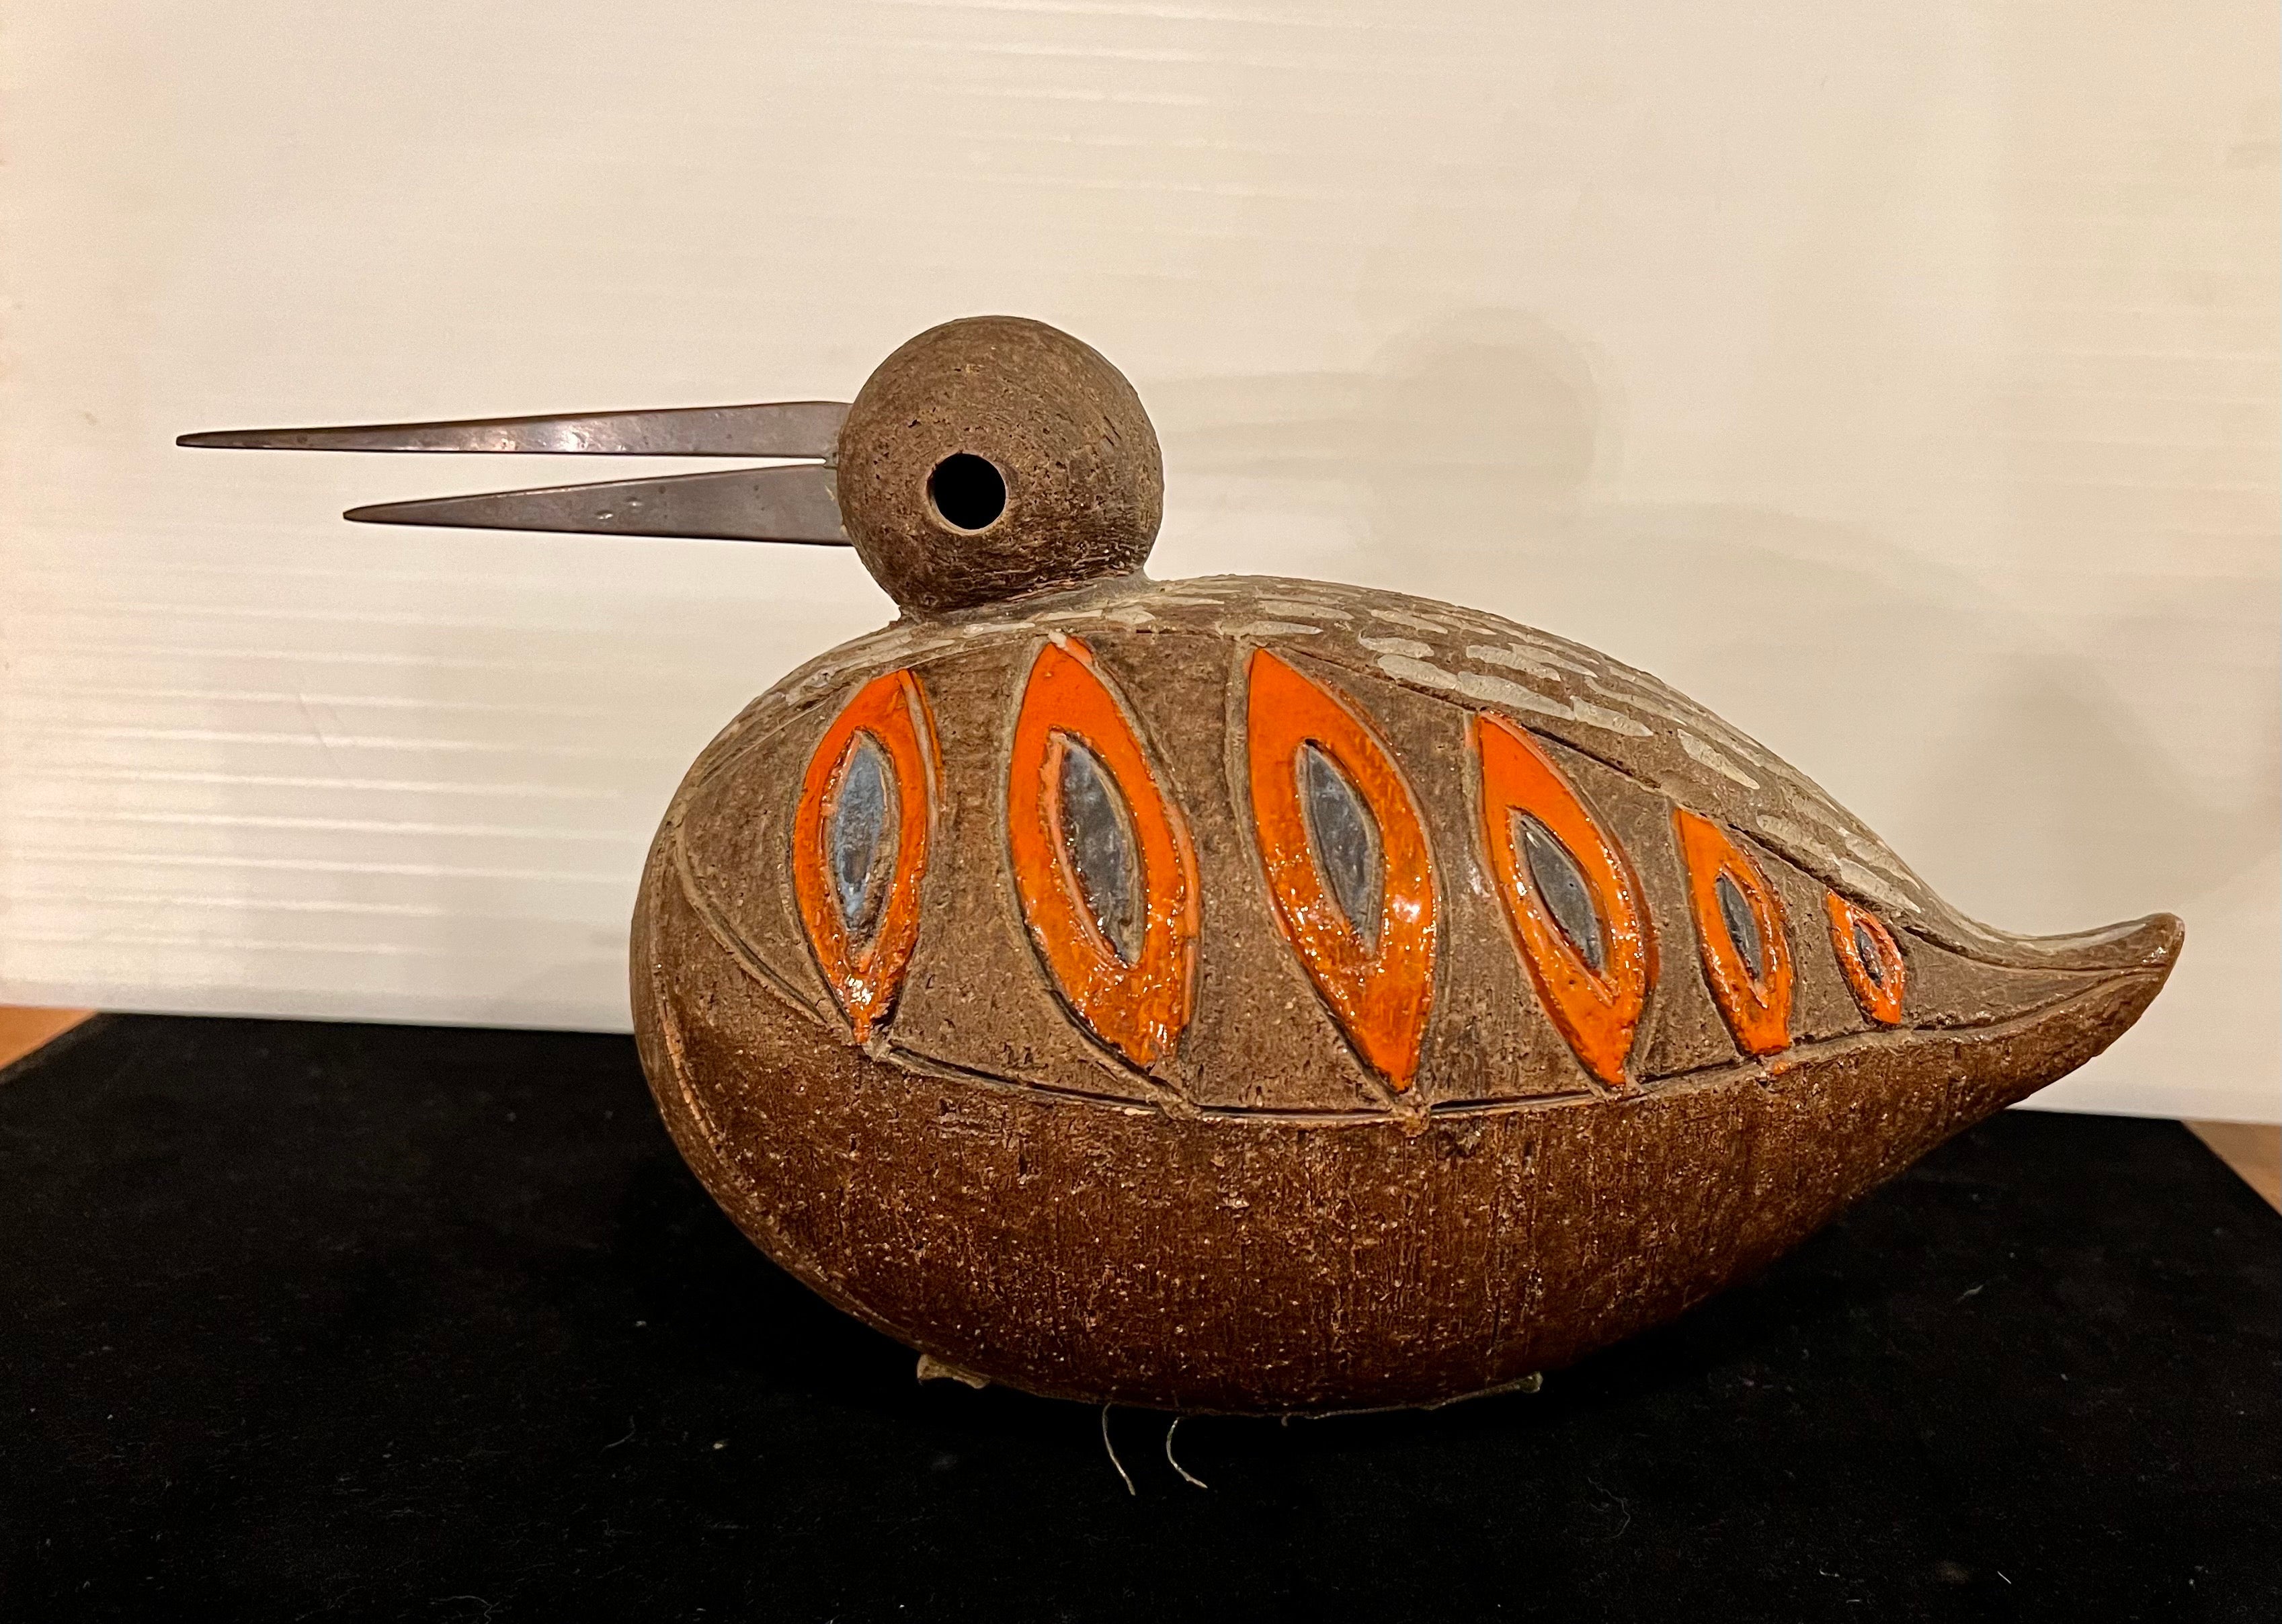 Beautiful rare very collectible bird/duck sculpture by Aldo Londi for Bitossi Raymor, circa the 1960s. The piece is in very great vintage condition with great color and texture; with metal pick, it would make a fantastic addition to any midcentury